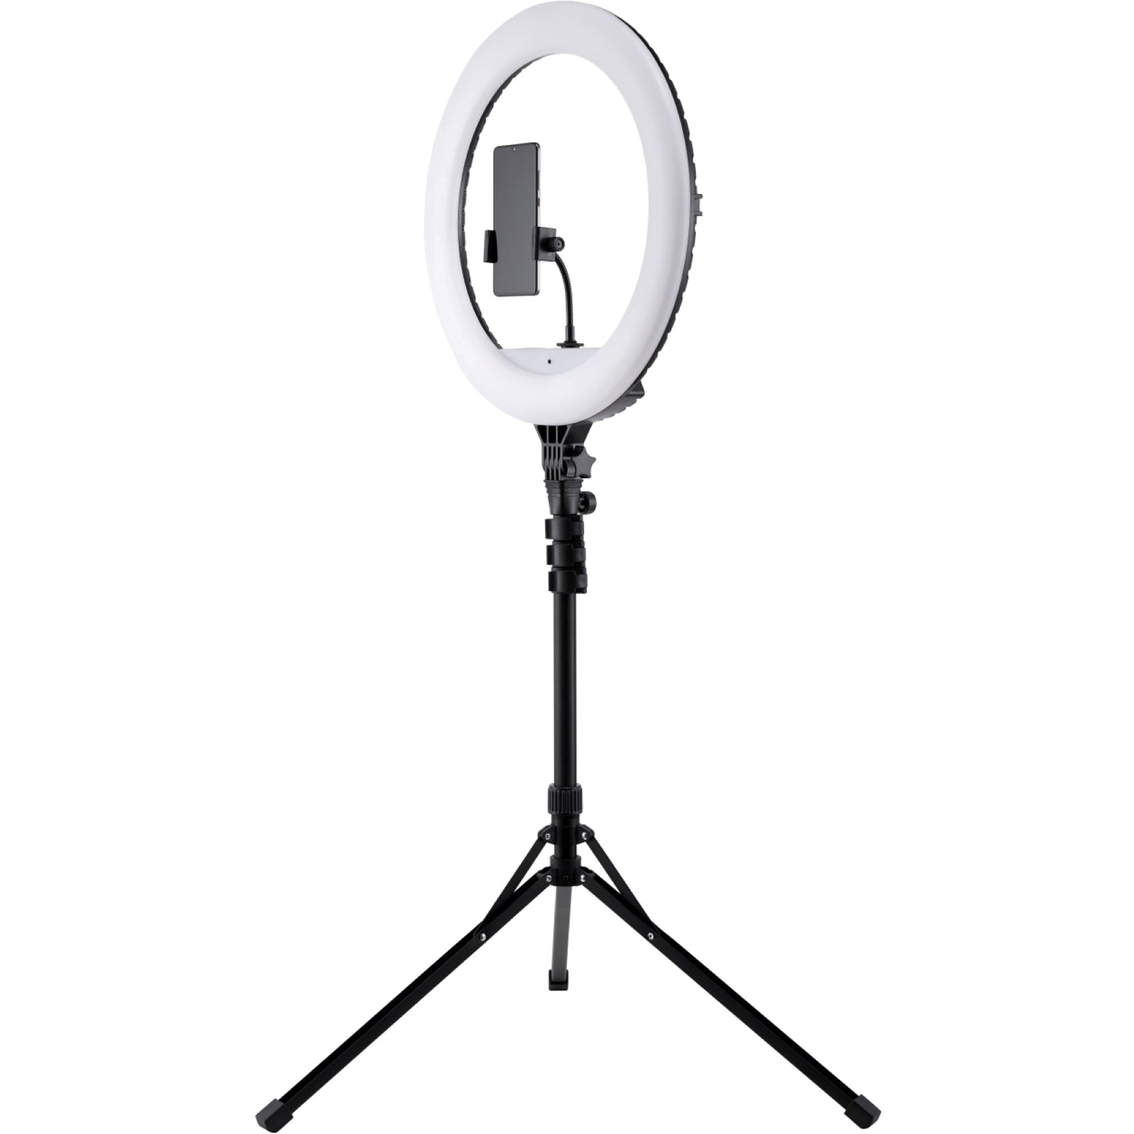 Vivitar 18 in. Ring Light Video Light Kit with 63 in. Stand and Remote - Image 6 of 10